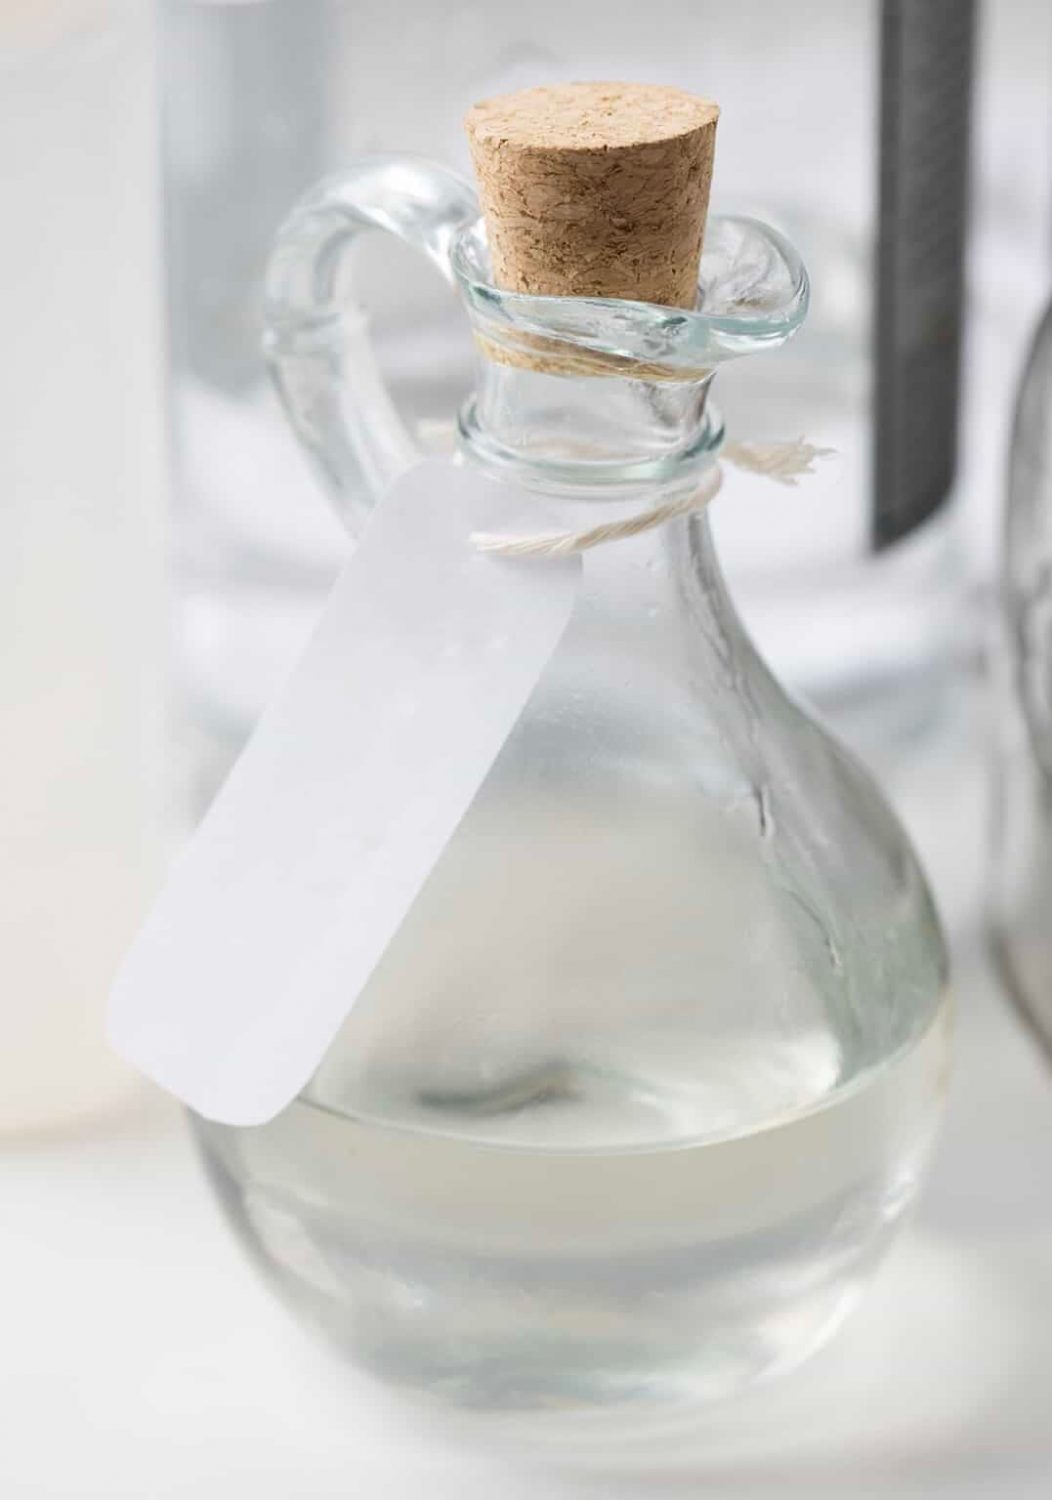 Homemade Sweet Elixir: Crafting the Perfect Simple Syrup